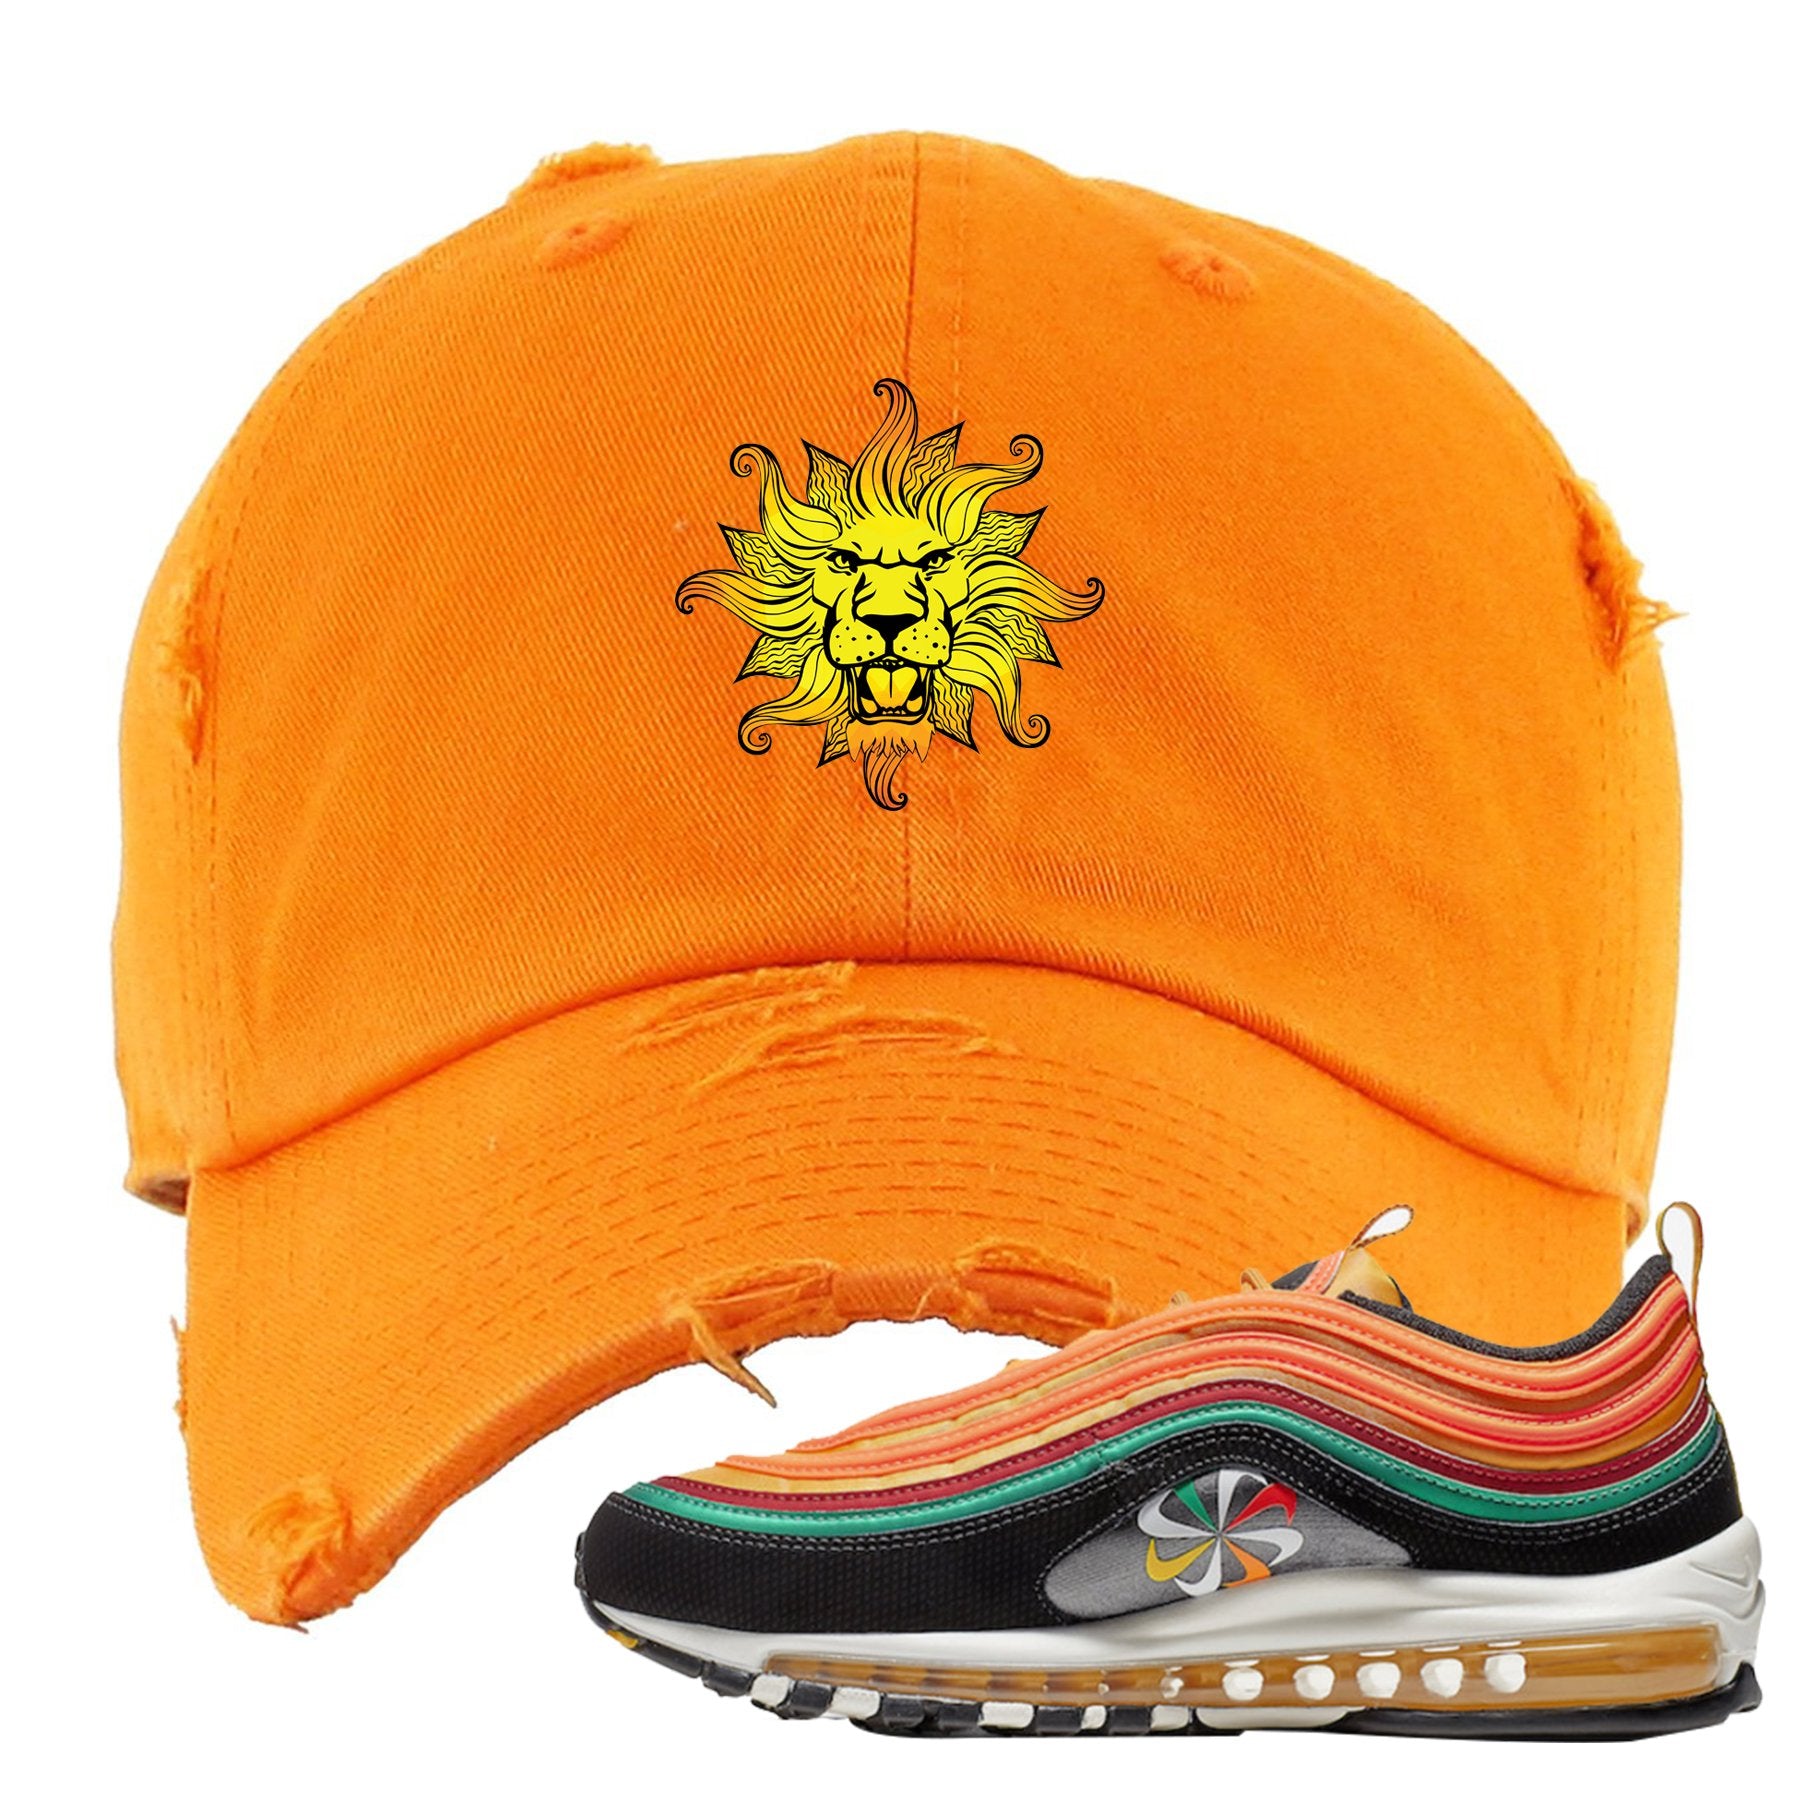 Embroidered on the front of the Air Max 97 Sunburst orange distressed sneaker matching dad hat is the vintage lion head logo